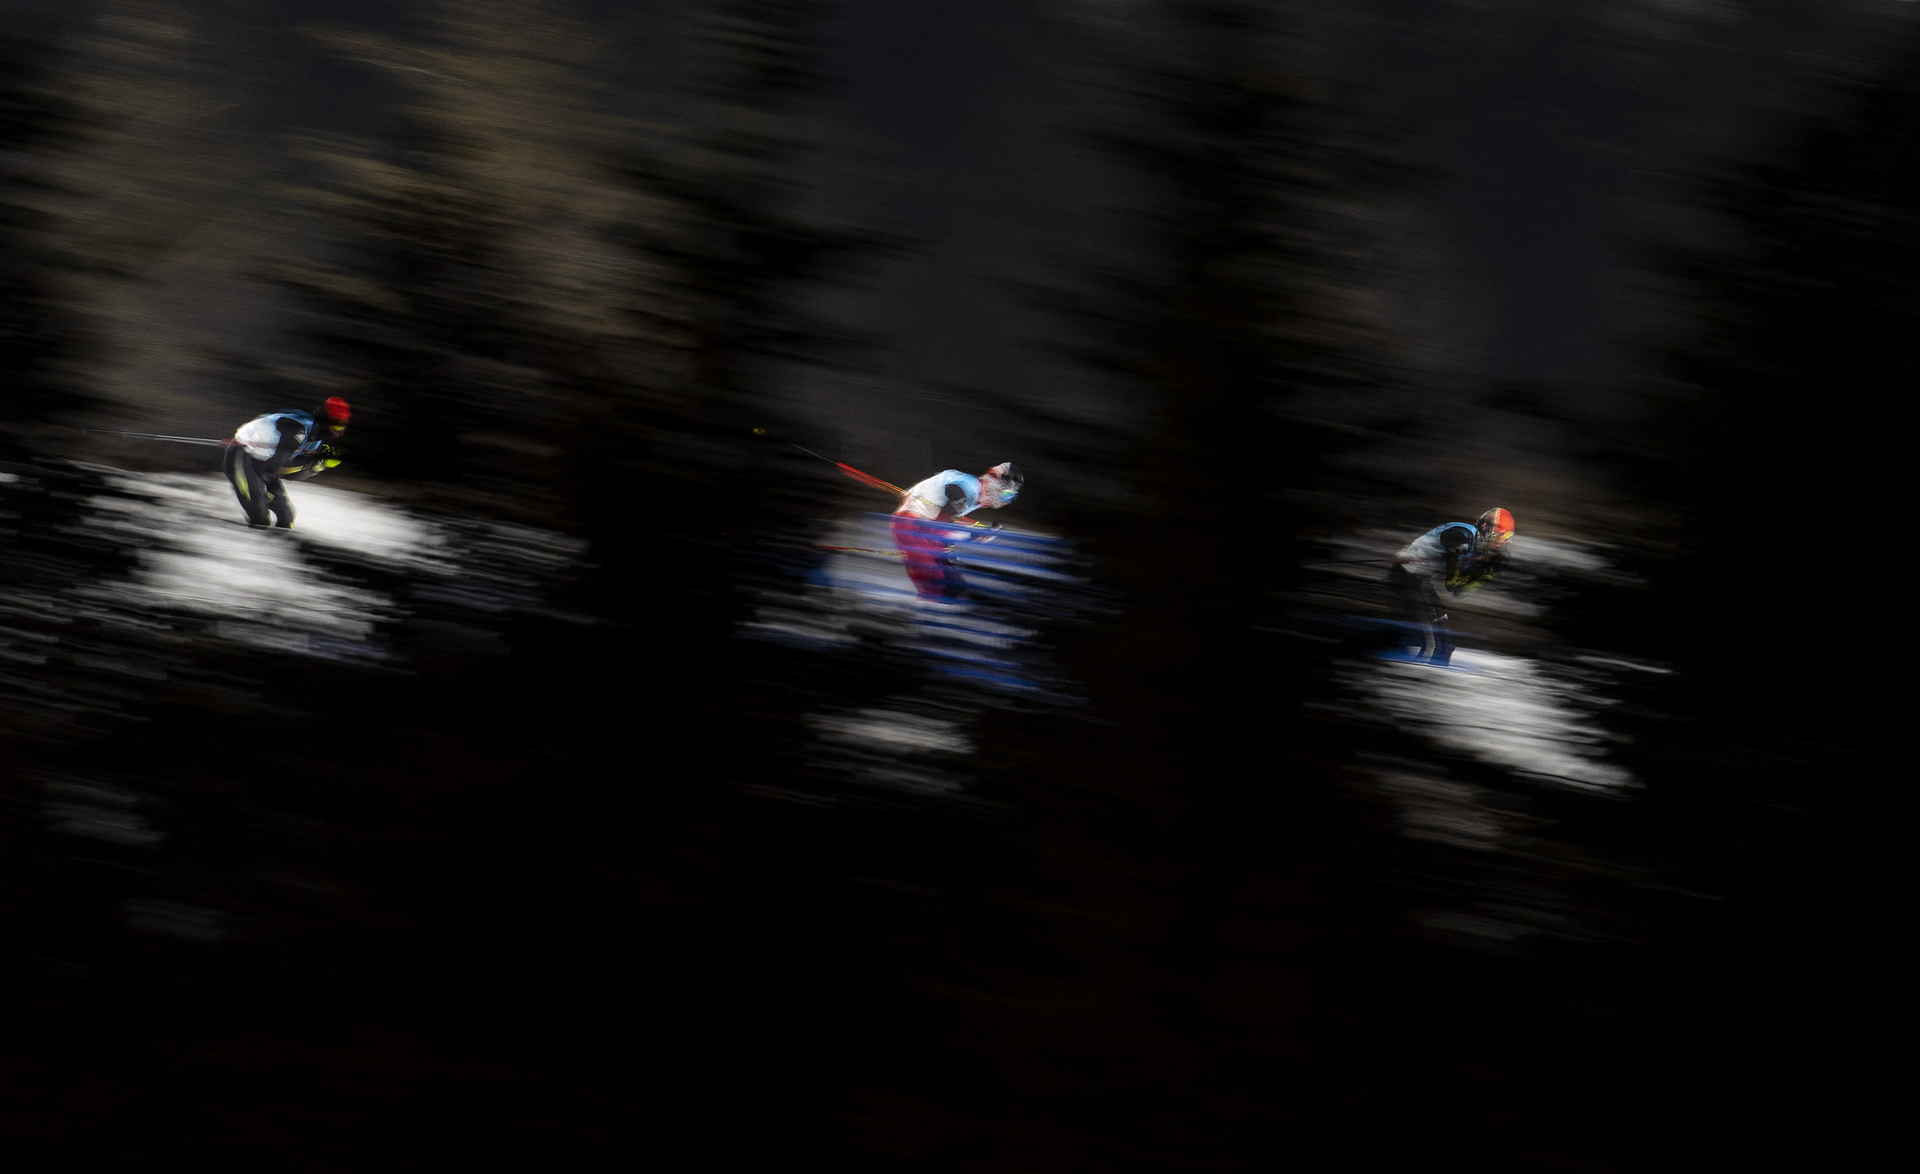 ZHANGJIAKOU, CHINA - FEBRUARY 09: Athletes compete during Nordic Combined Individual Gundersen Normal Hill/10km, Cross-Country Round at The National Cross-Country Skiing Centre on February 09, 2022 in Zhangjiakou, China.  